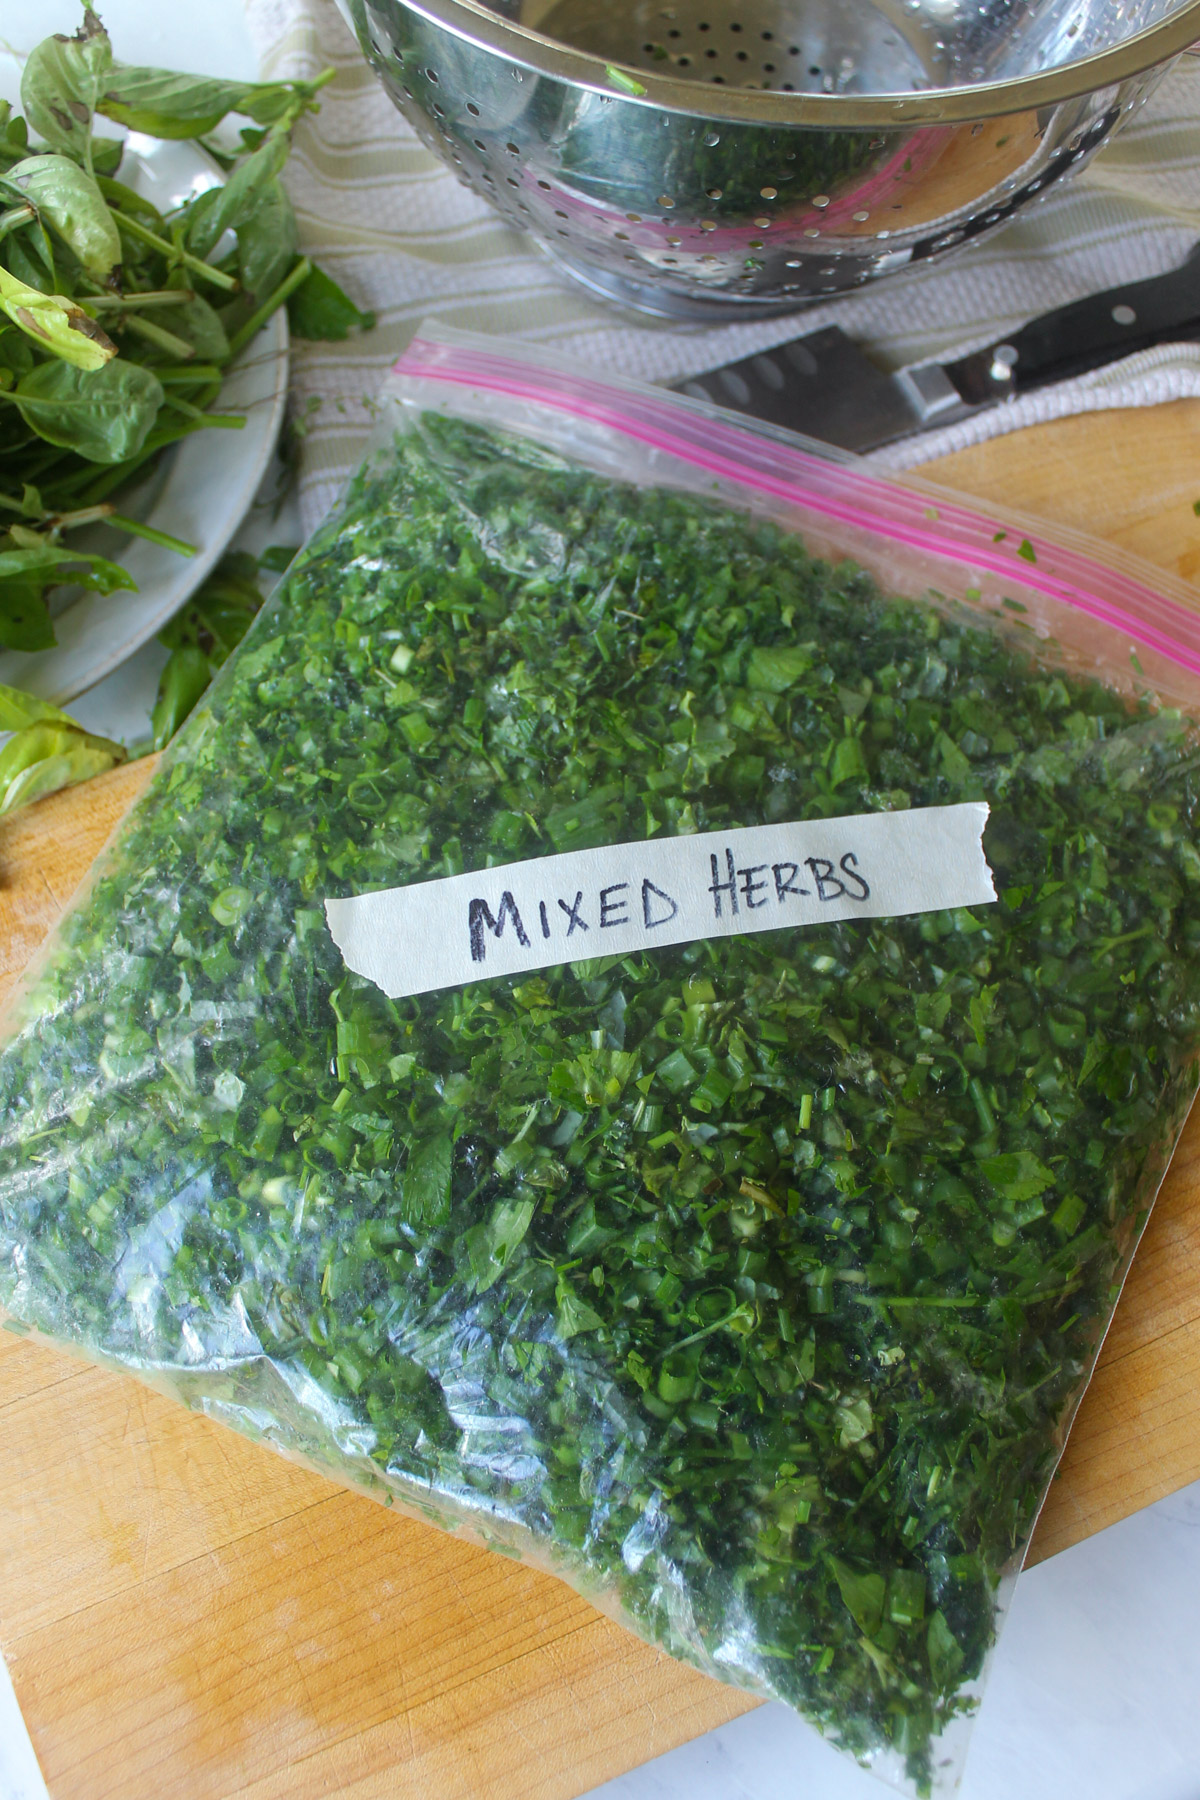 A freezer bag of mixed herbs and greens with a label taped on it Mixed Herbs.